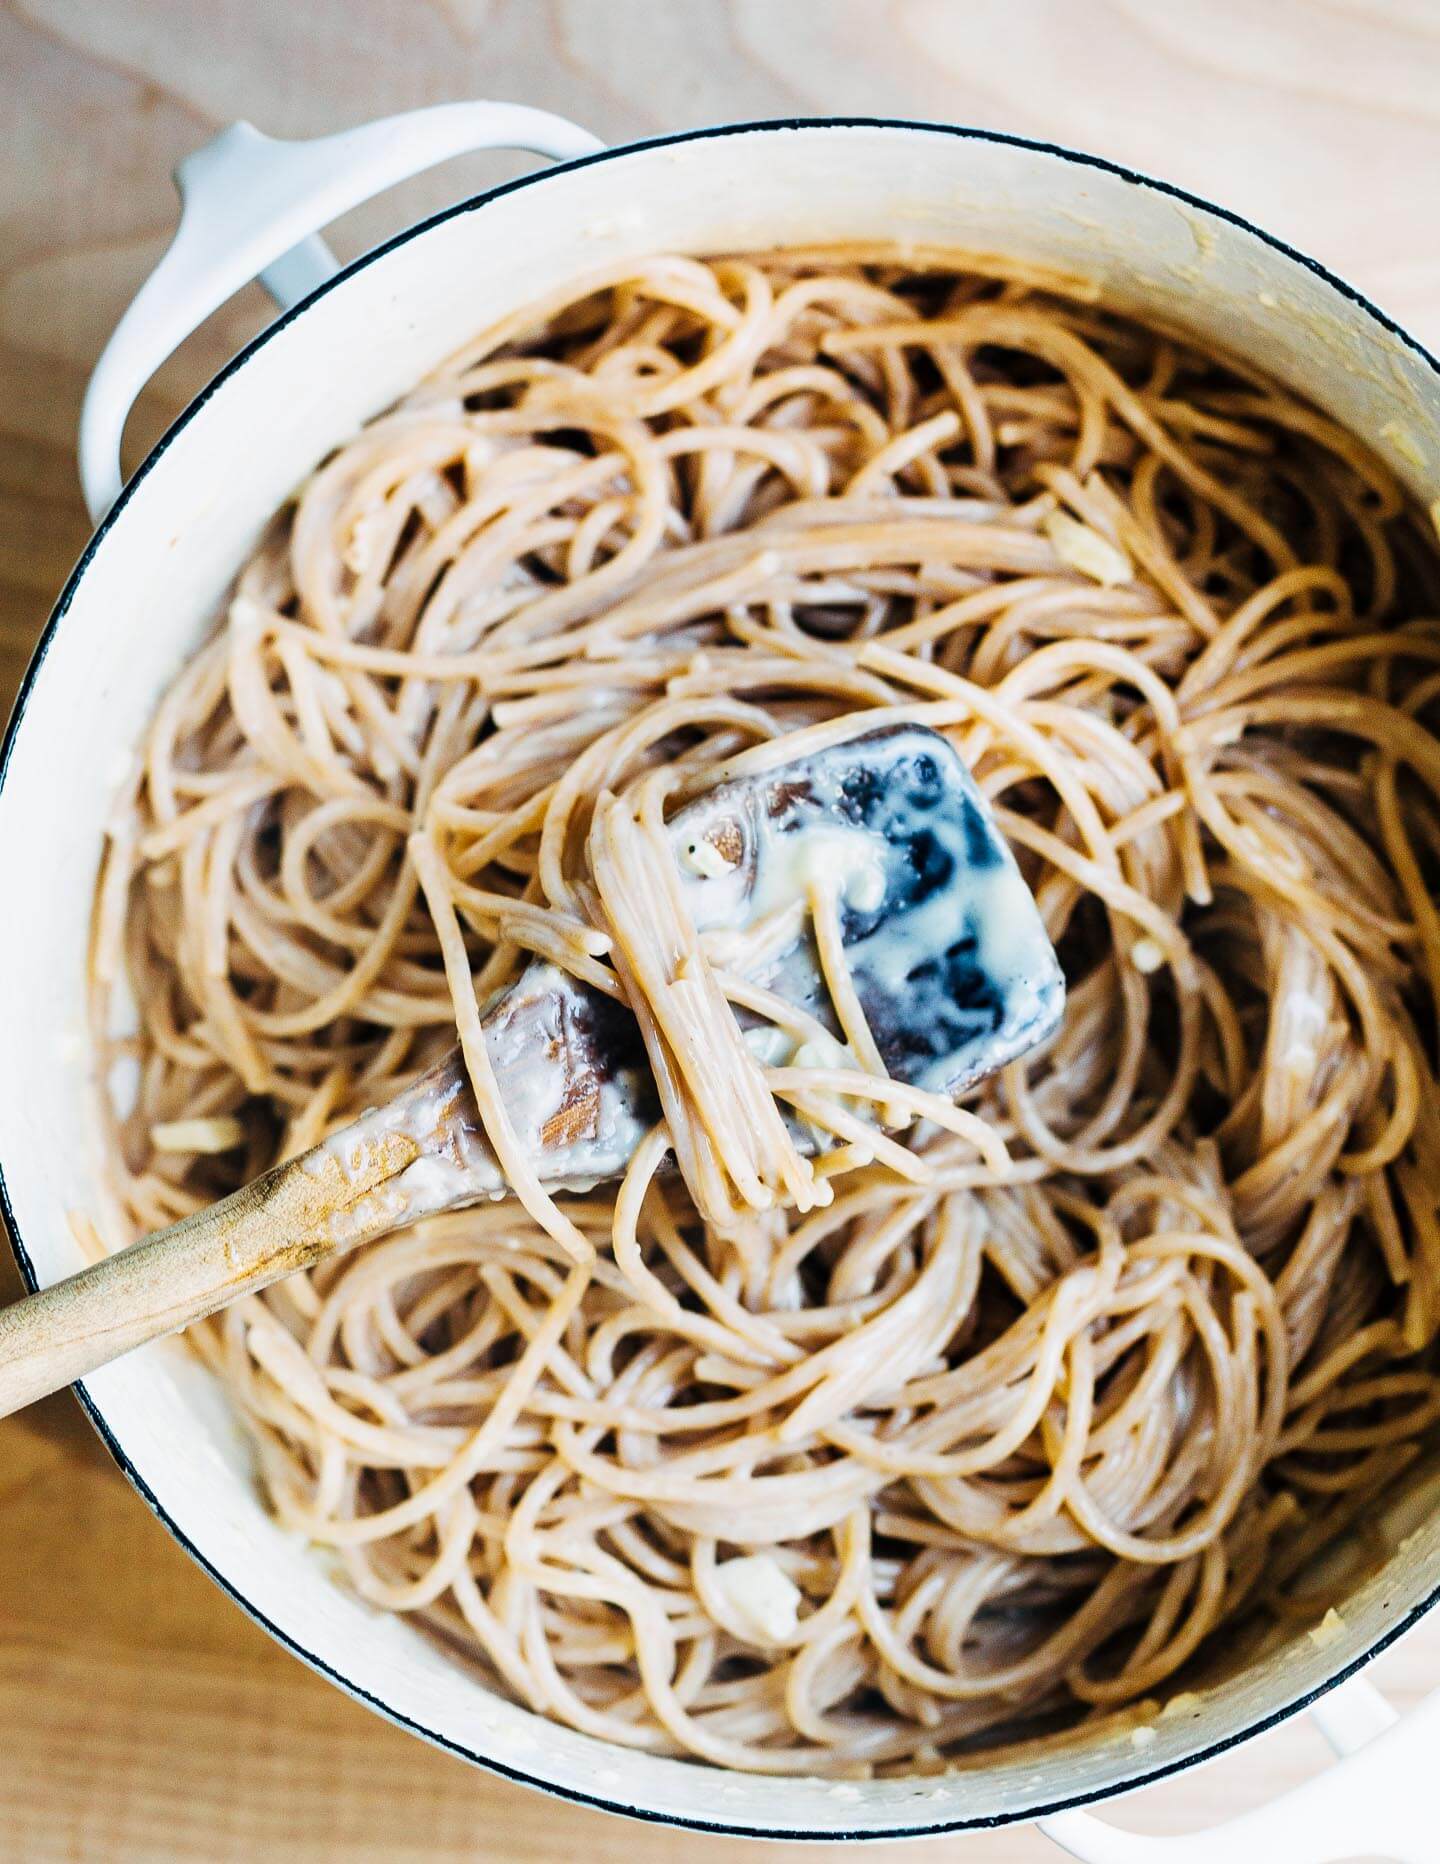 Speghetti tossed with Parmesan sauce.